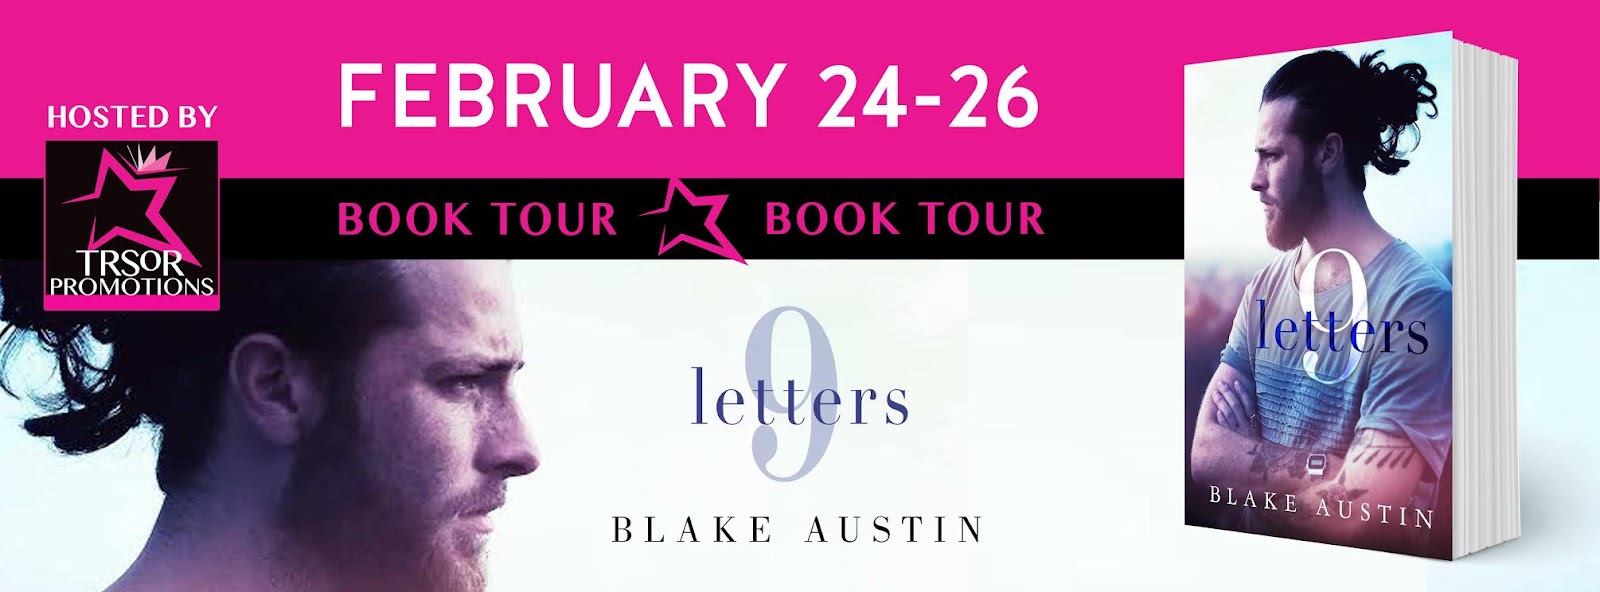 9 LETTERS BOOK TOUR.jpg